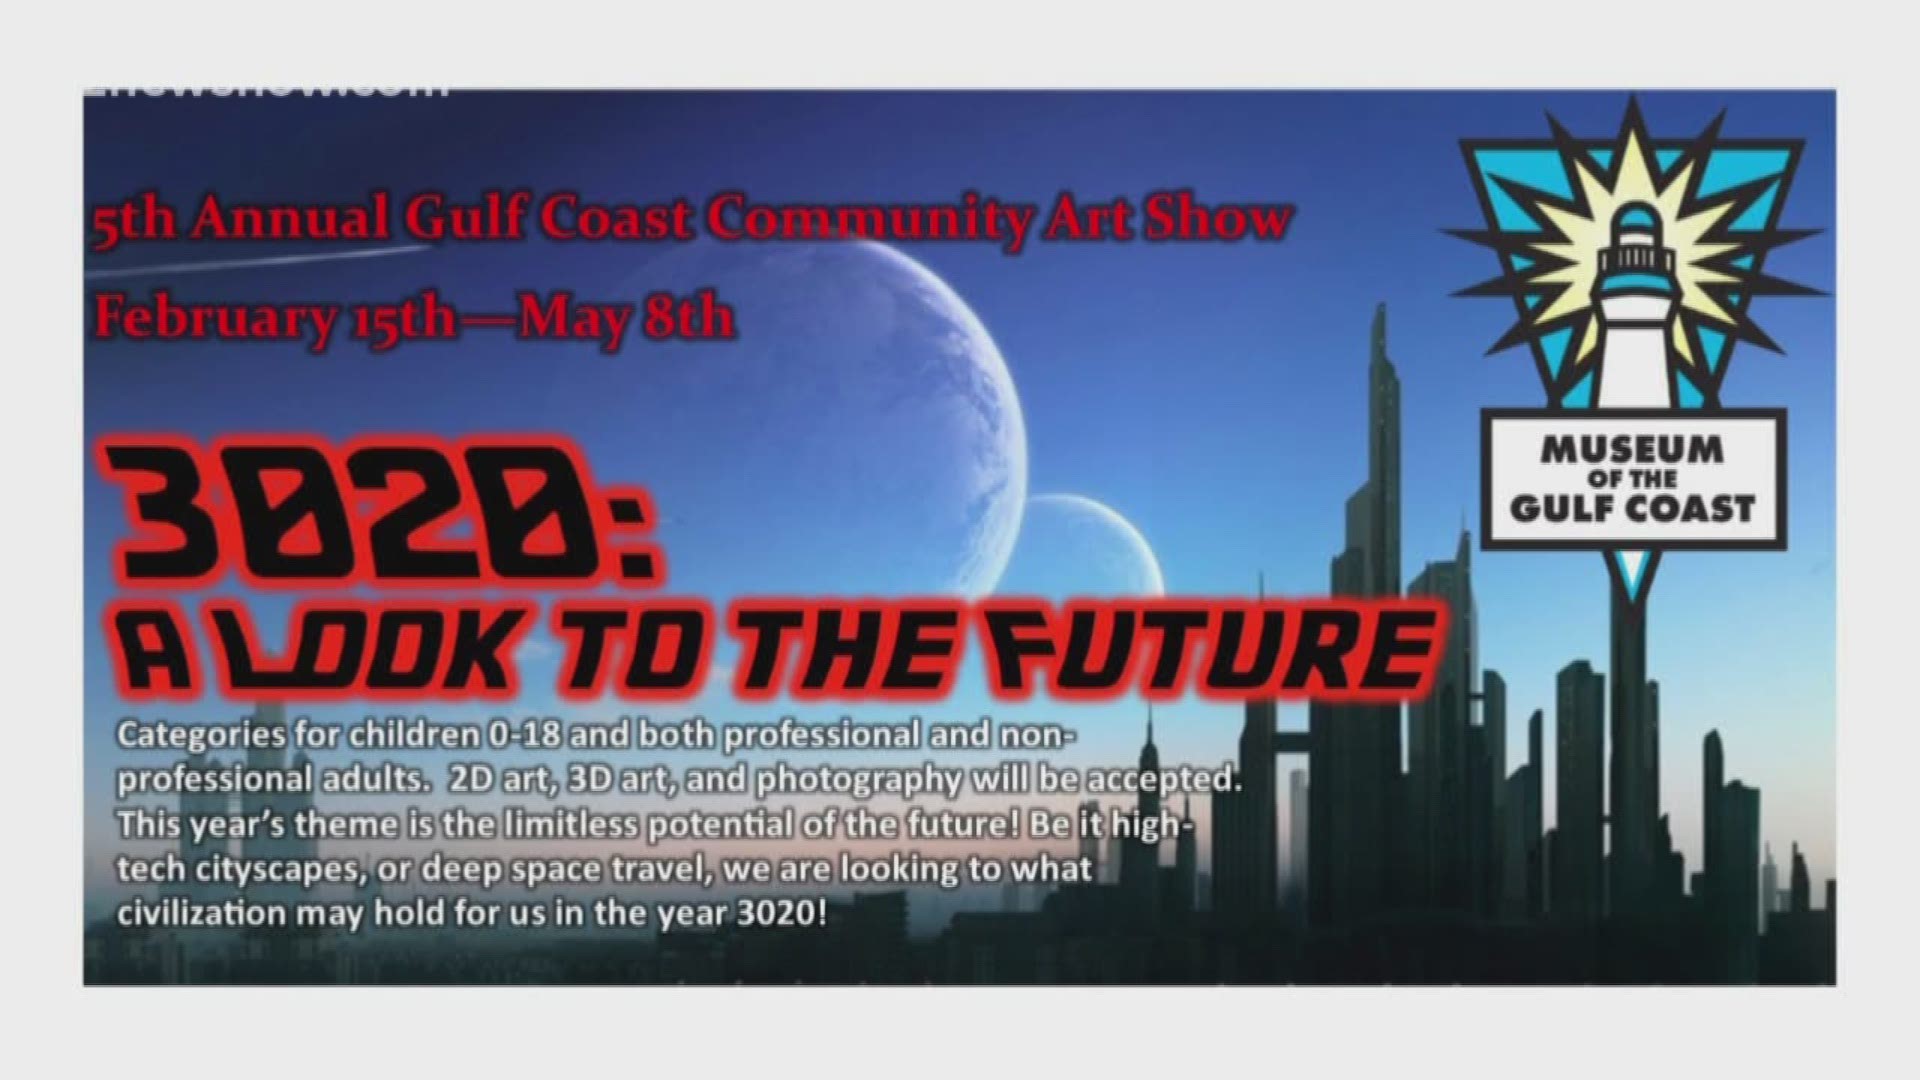 This is the 5th annual Gulf Coast Community Art Show. The free event starts this weekend.